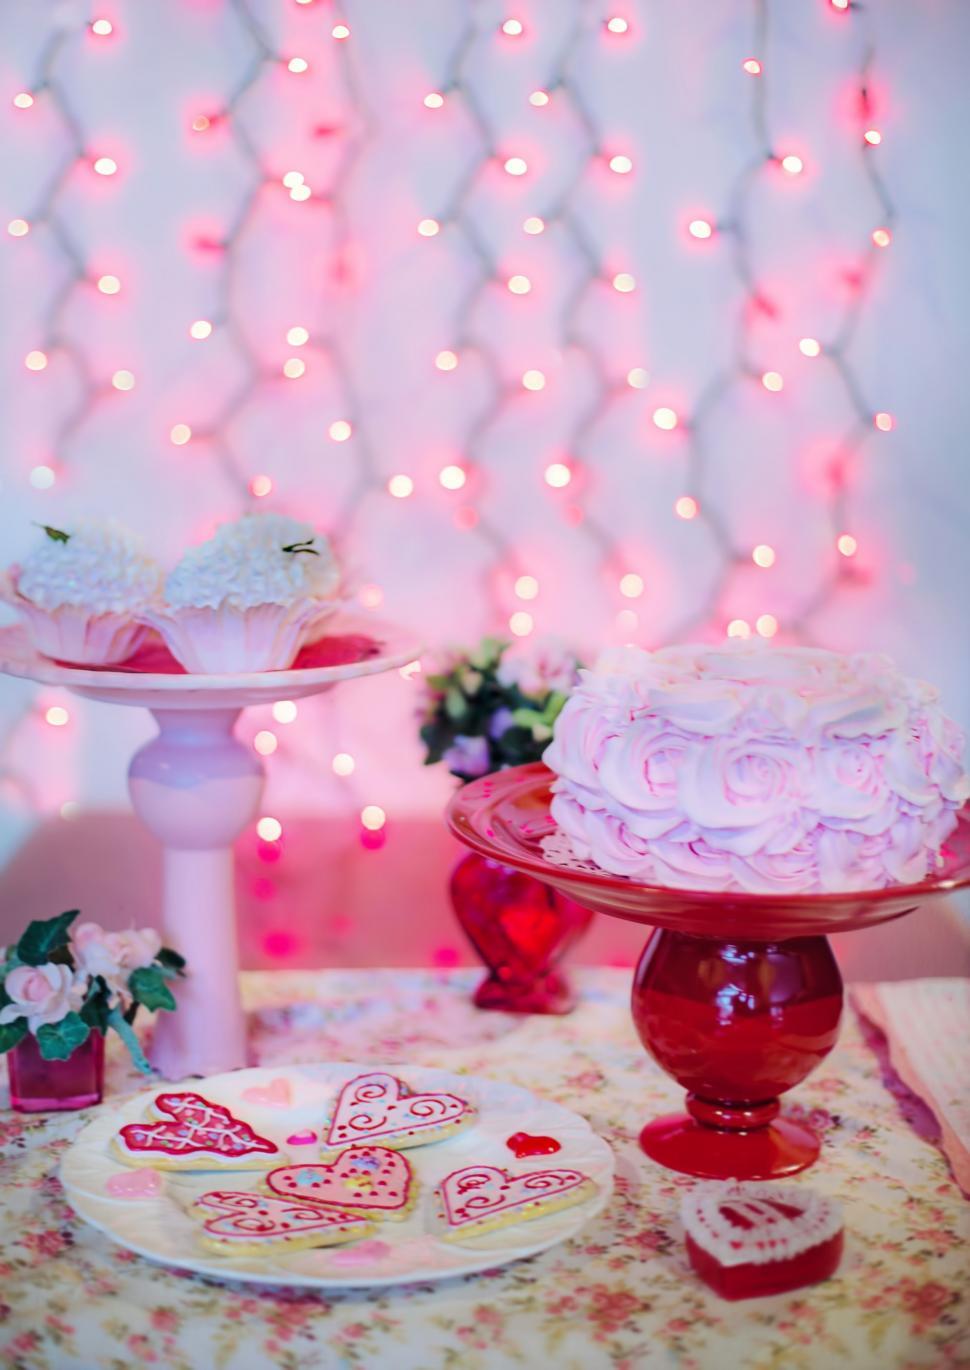 Free Image of Valentine cookies and pink bokeh lights 